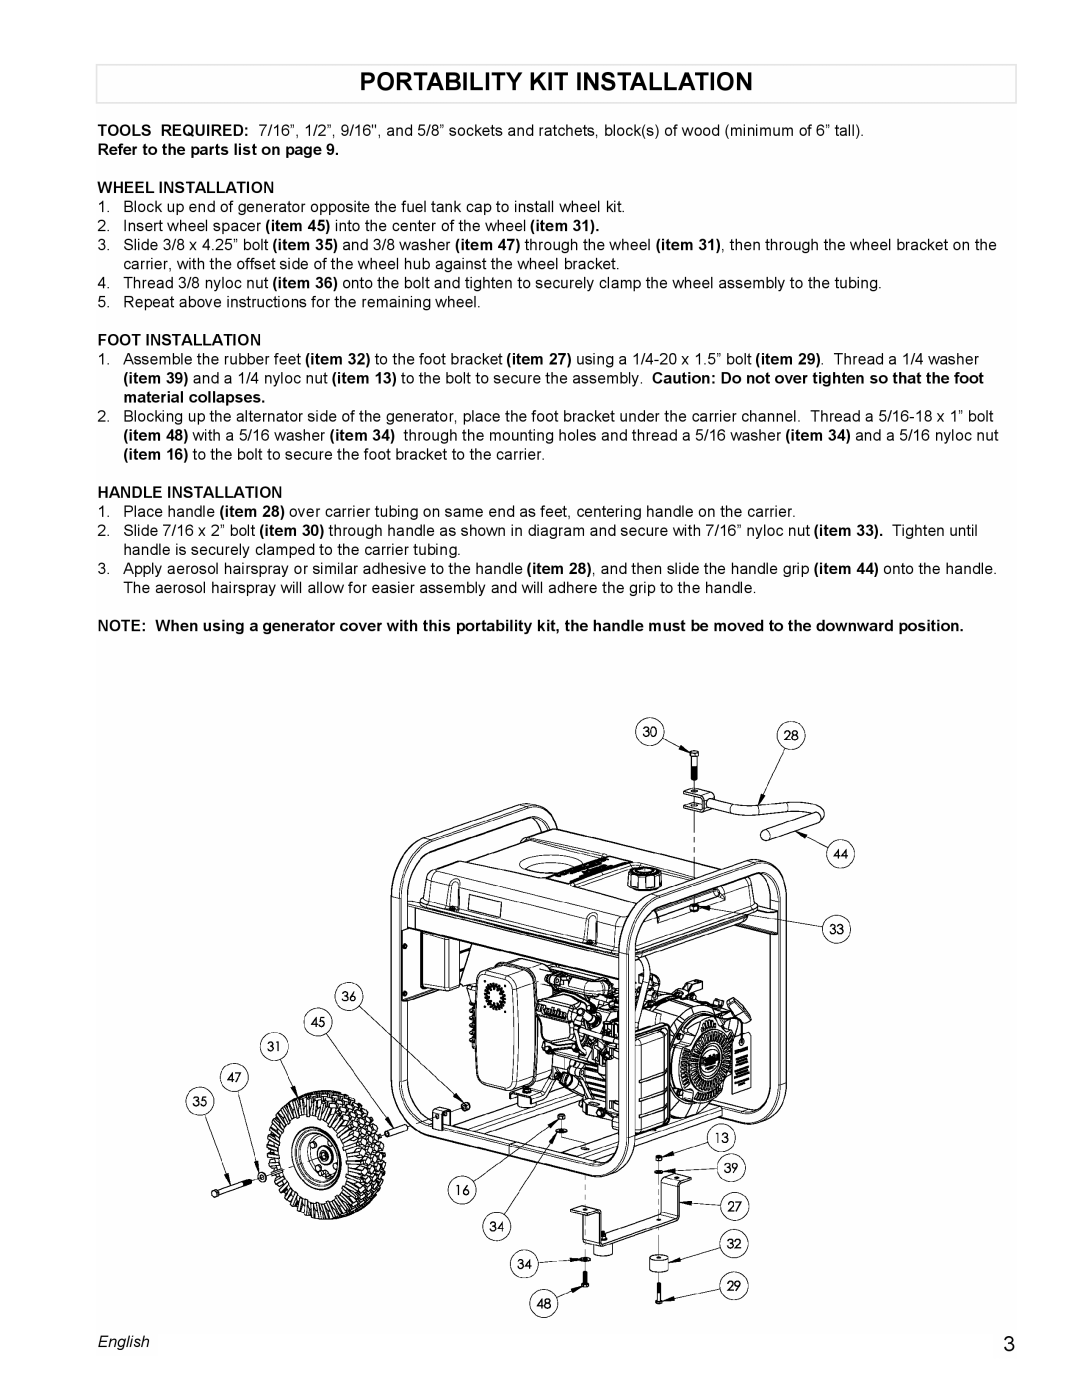 Powermate PM0435250 Portability Kit Installation, Refer to the parts list on page, Wheel Installation, Foot Installation 